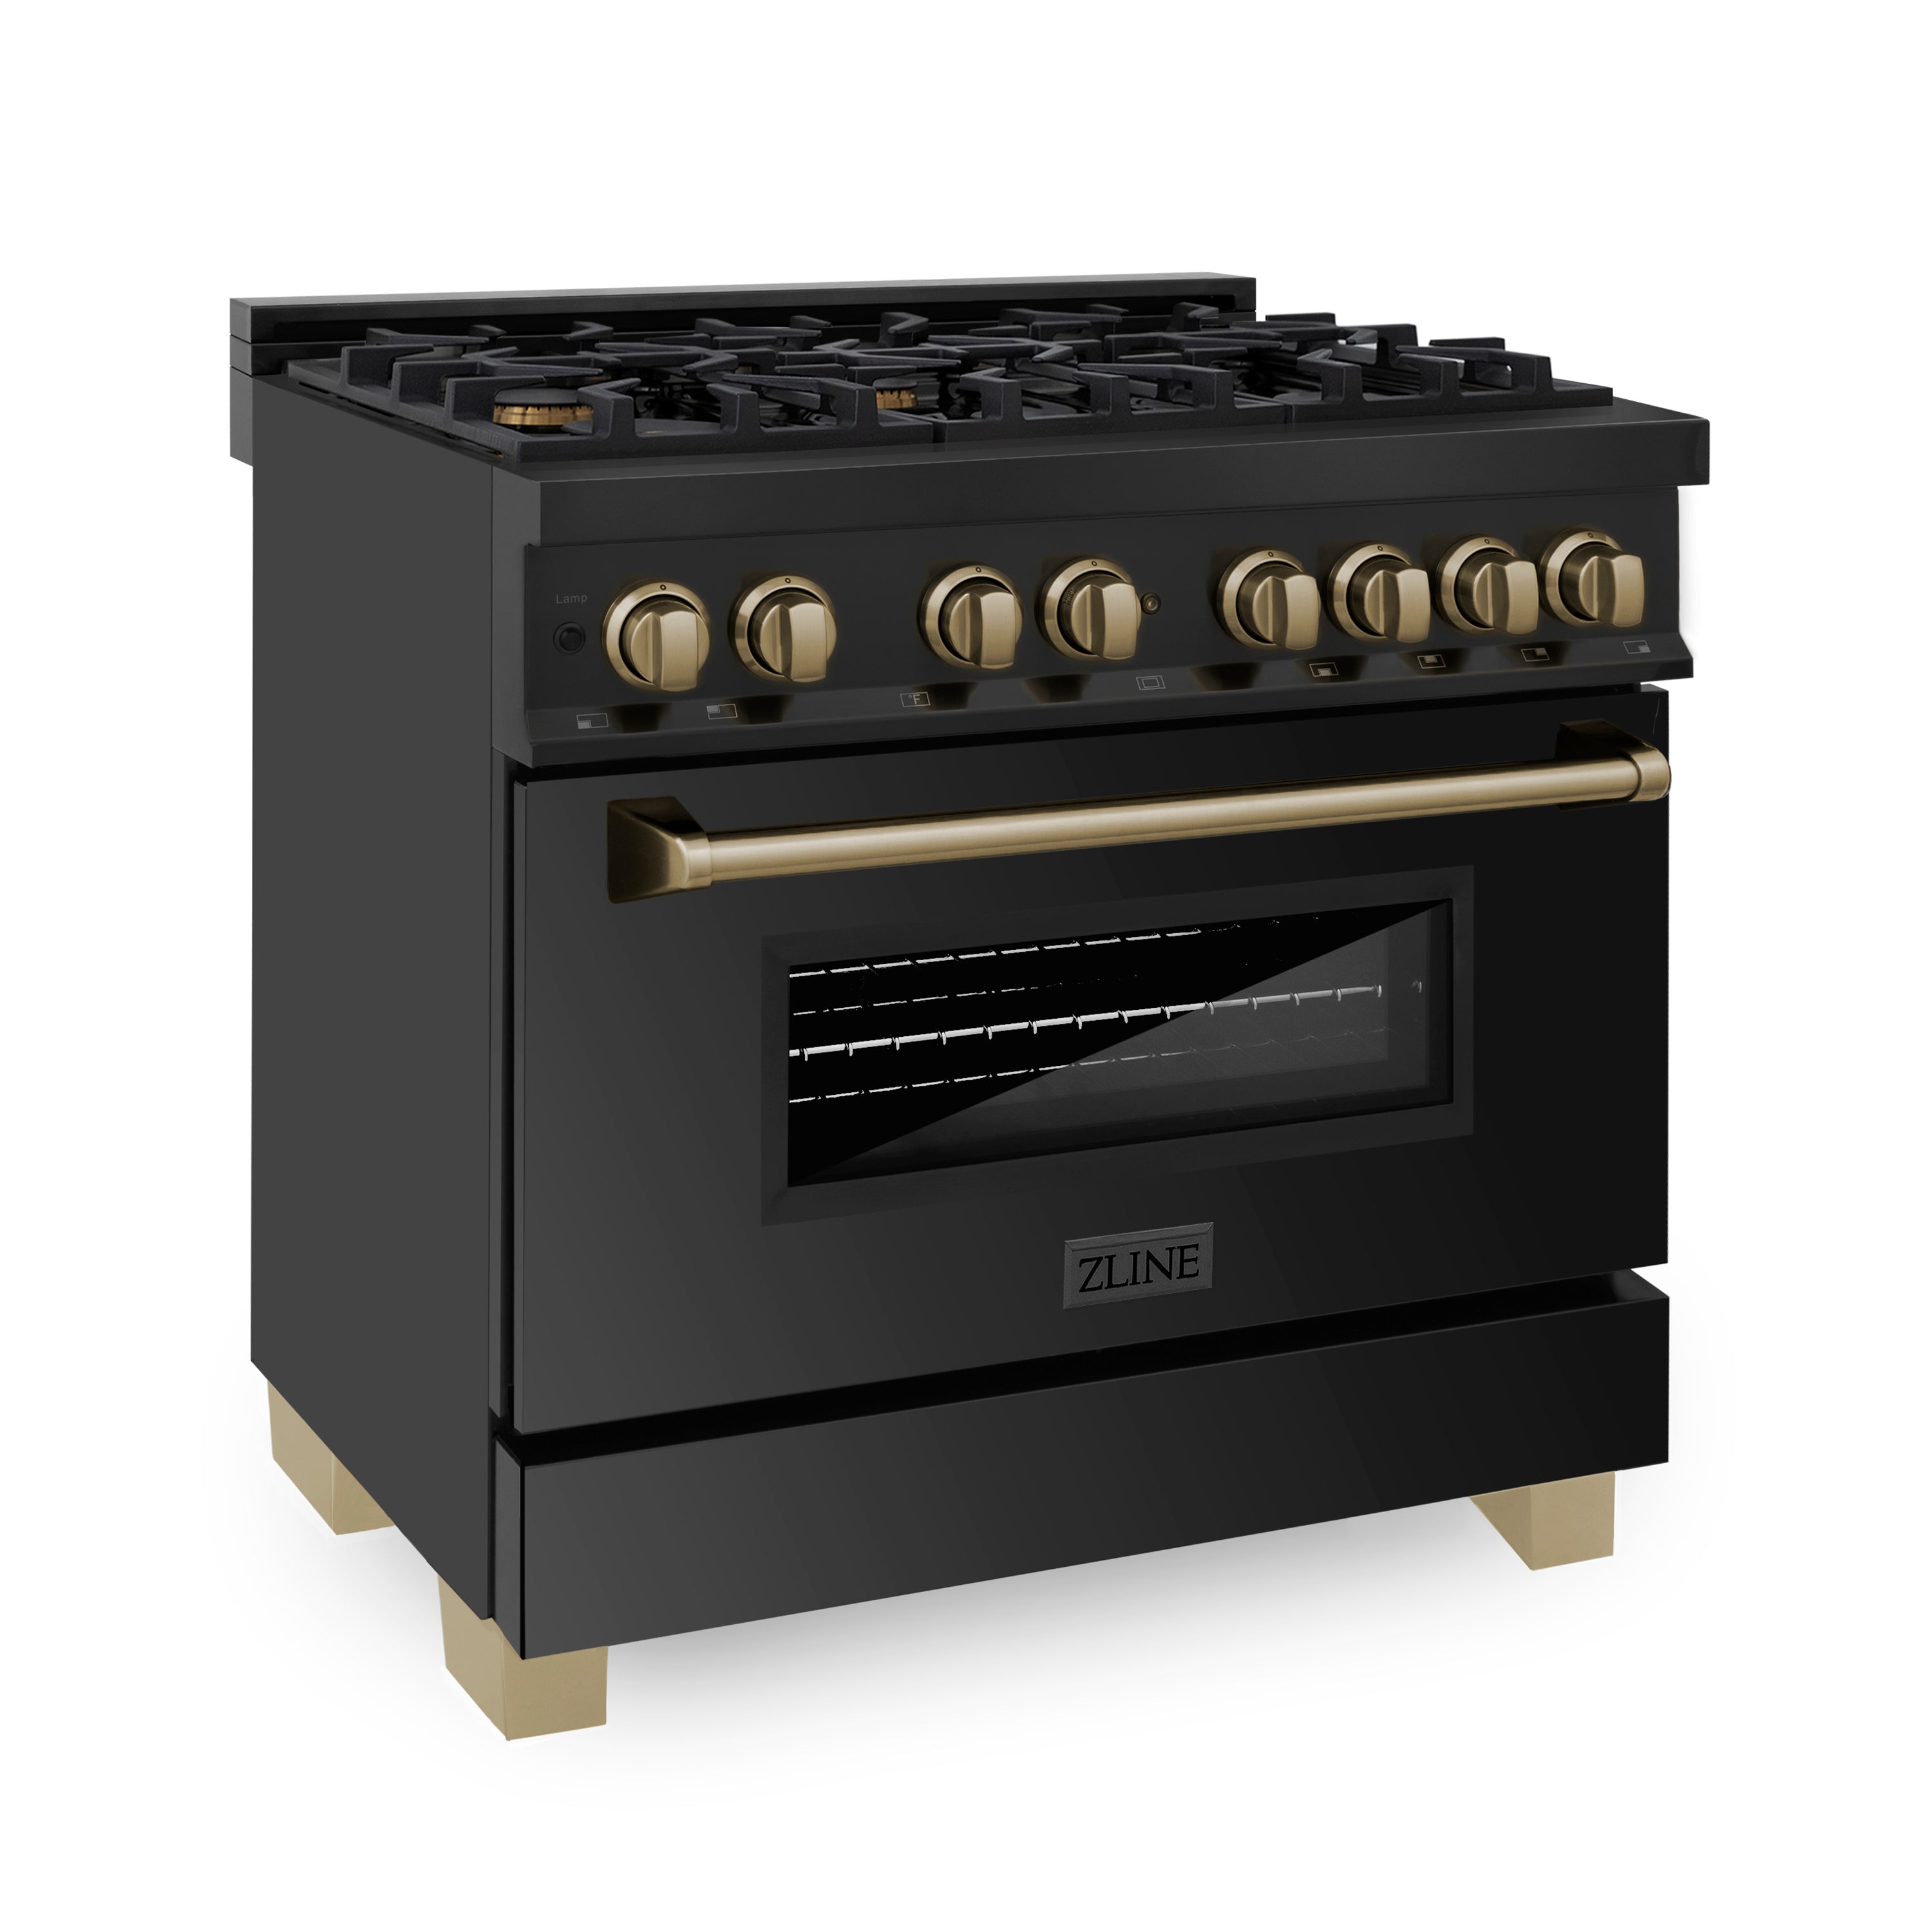 ZLINE Autograph Edition 36" 4.6 cu. ft. Dual Fuel Range with Gas Stove and Electric Oven in Black Stainless Steel with Champagne Bronze Accents (RABZ-36-CB)